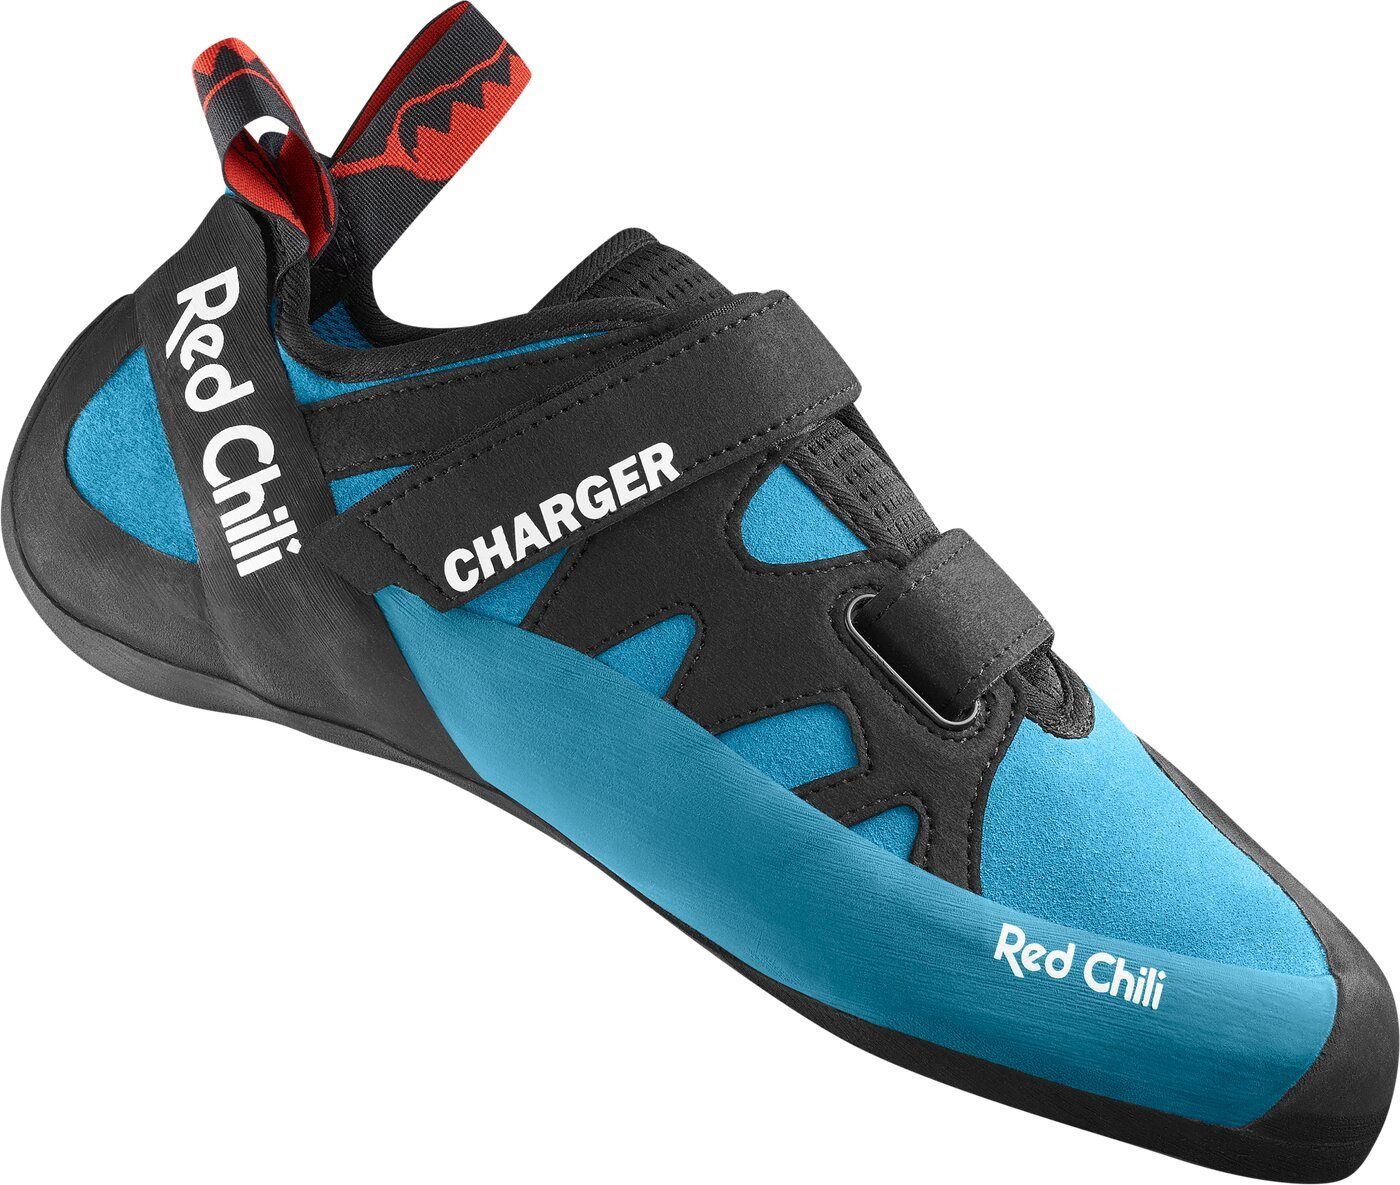 Chili Charger Red INKBLUE Kletterschuh